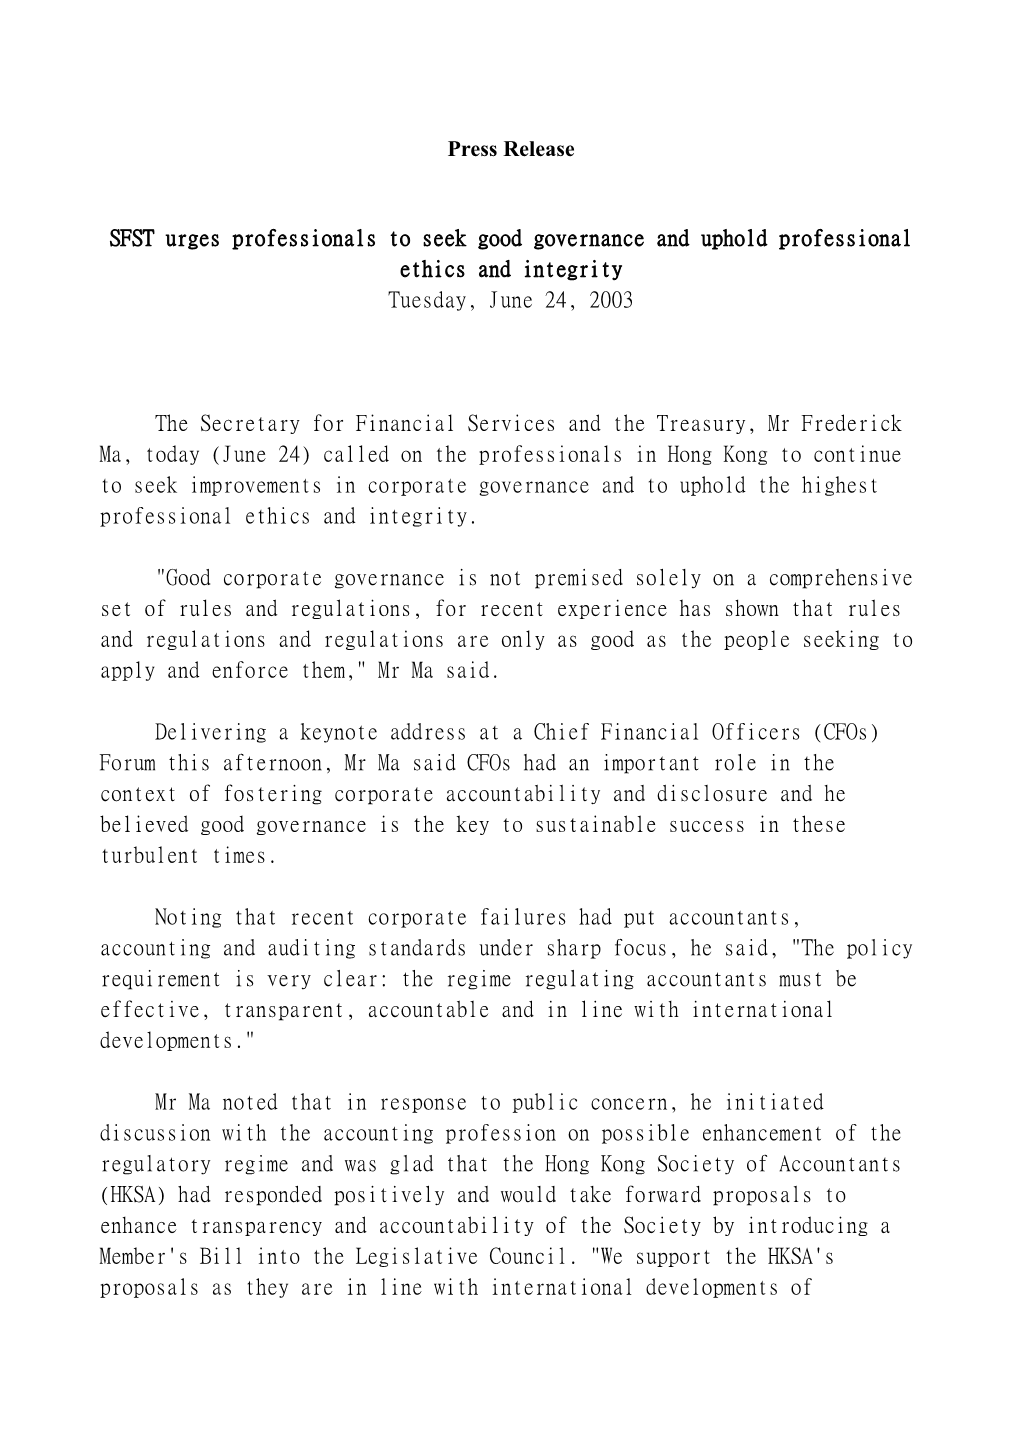 SFST Urges Professionals to Seek Good Governance and Uphold Professional Ethics and Integrity